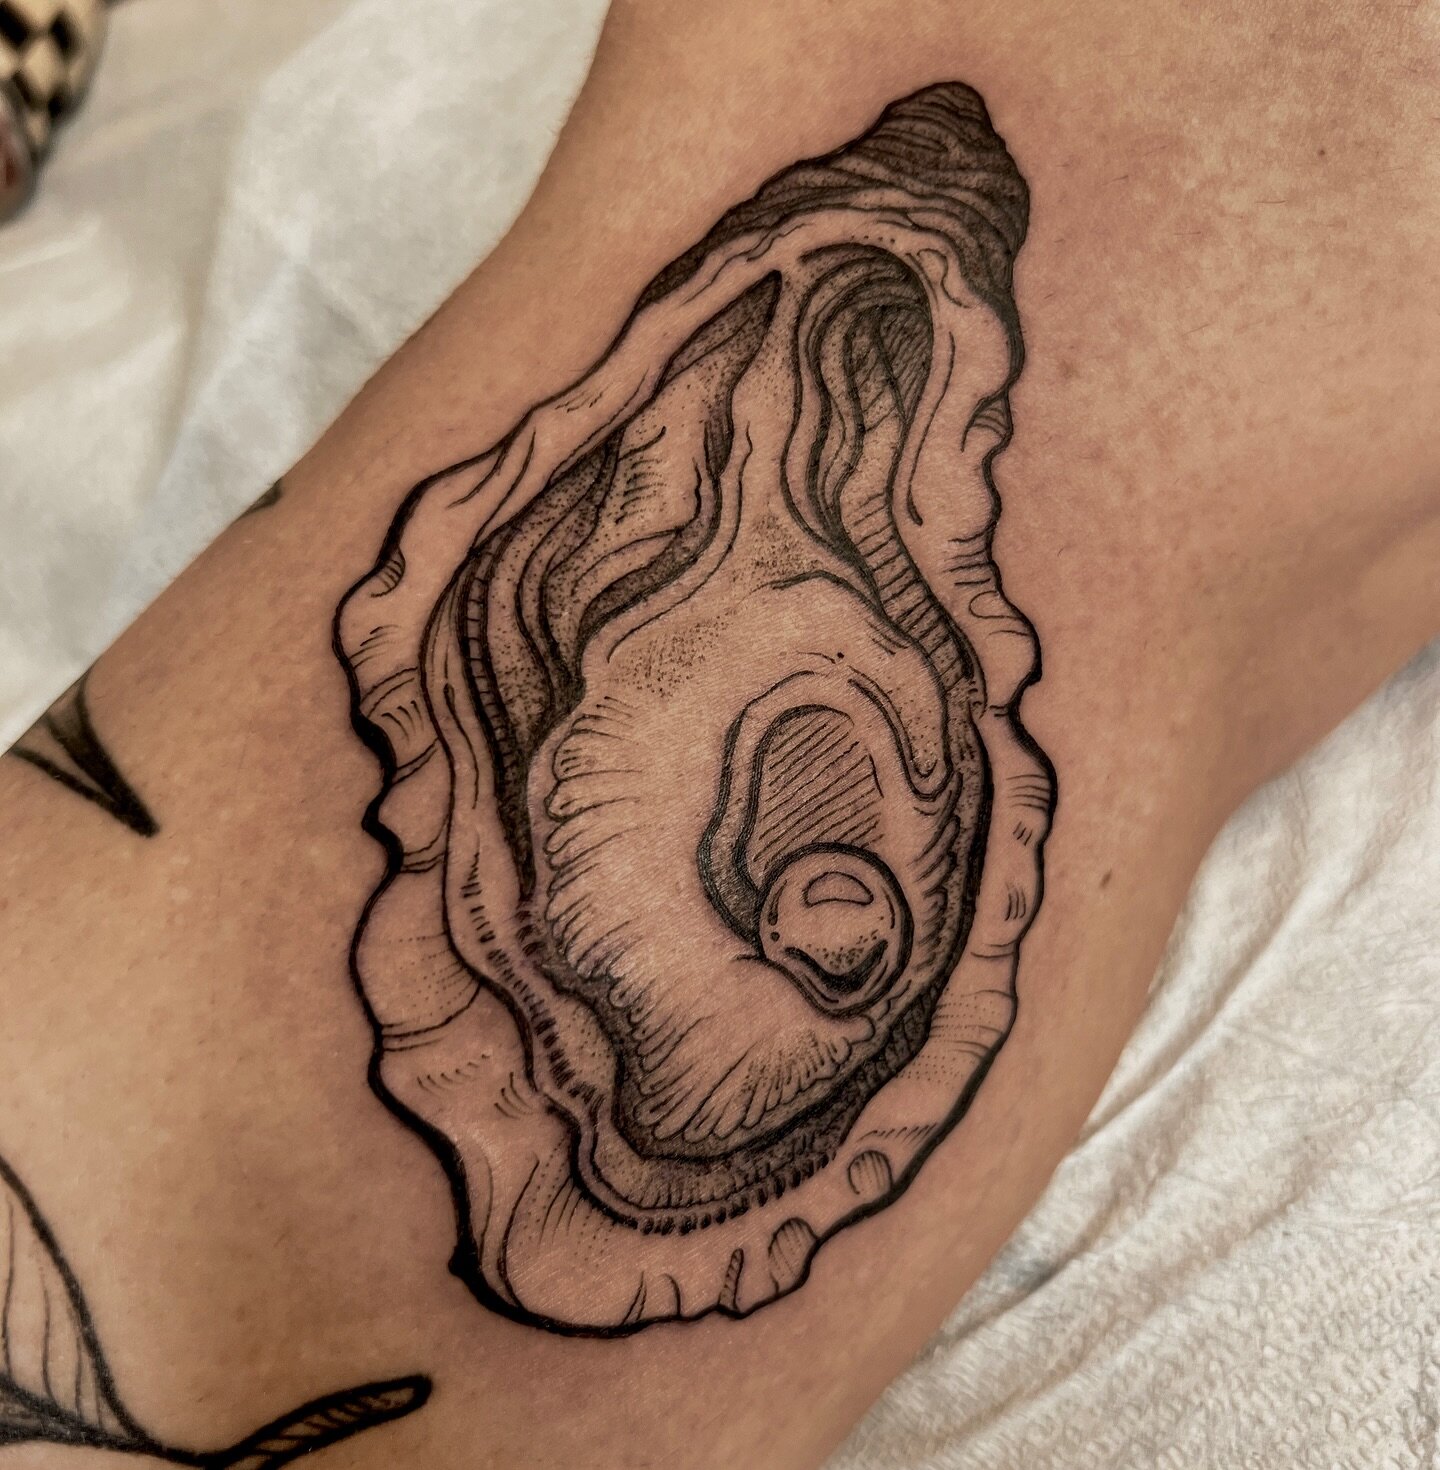 Idk why but I think oysters are just the coolest looking things. SO clearly I was stoked to do this fun little oyster bb for the lovely Jessica! Thanks, friend!
.
.
.
.
#tattoos #seattle #seattletattoo #oyster #oysterart